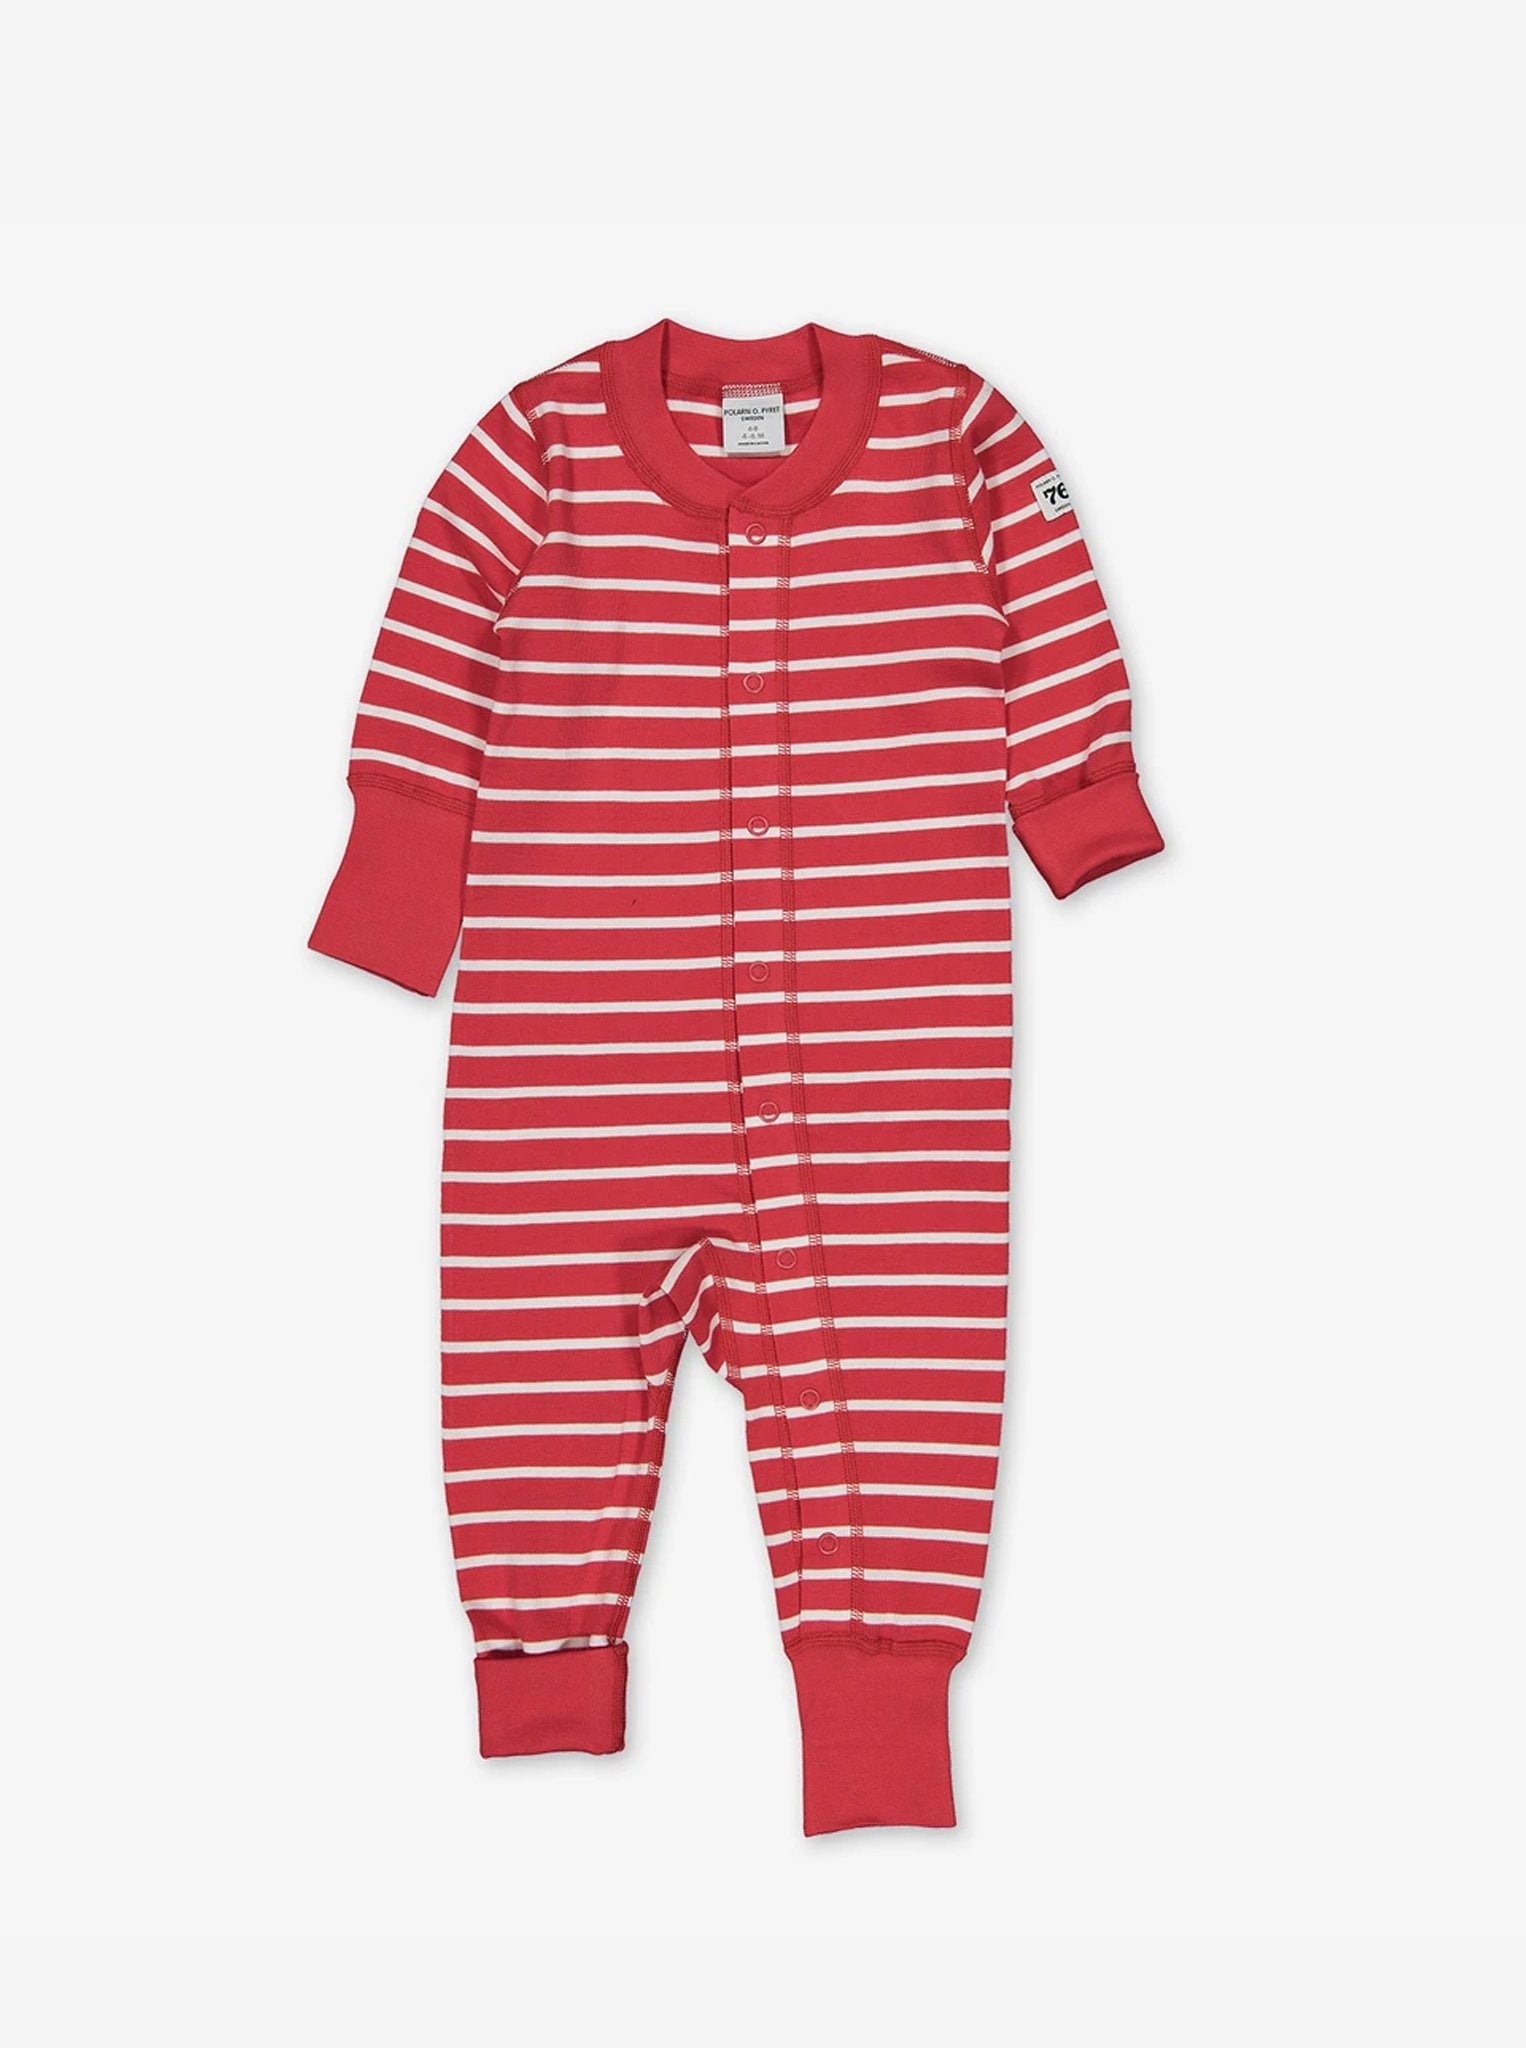 red and white stripes baby all in one, ethical organic cotton, polarn o. pyret quality 